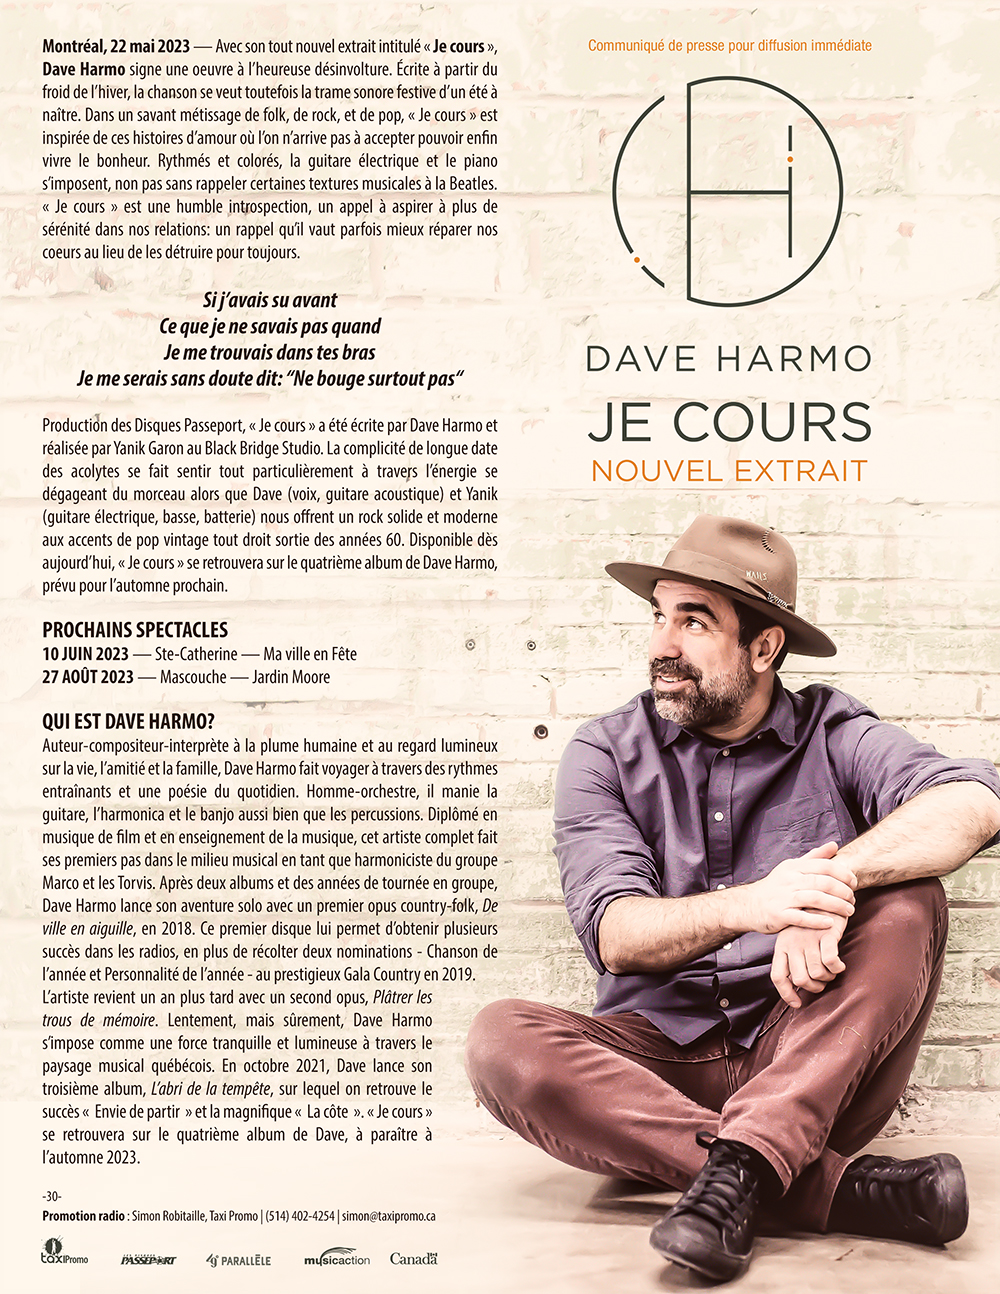 Dave Harmo - Je cours